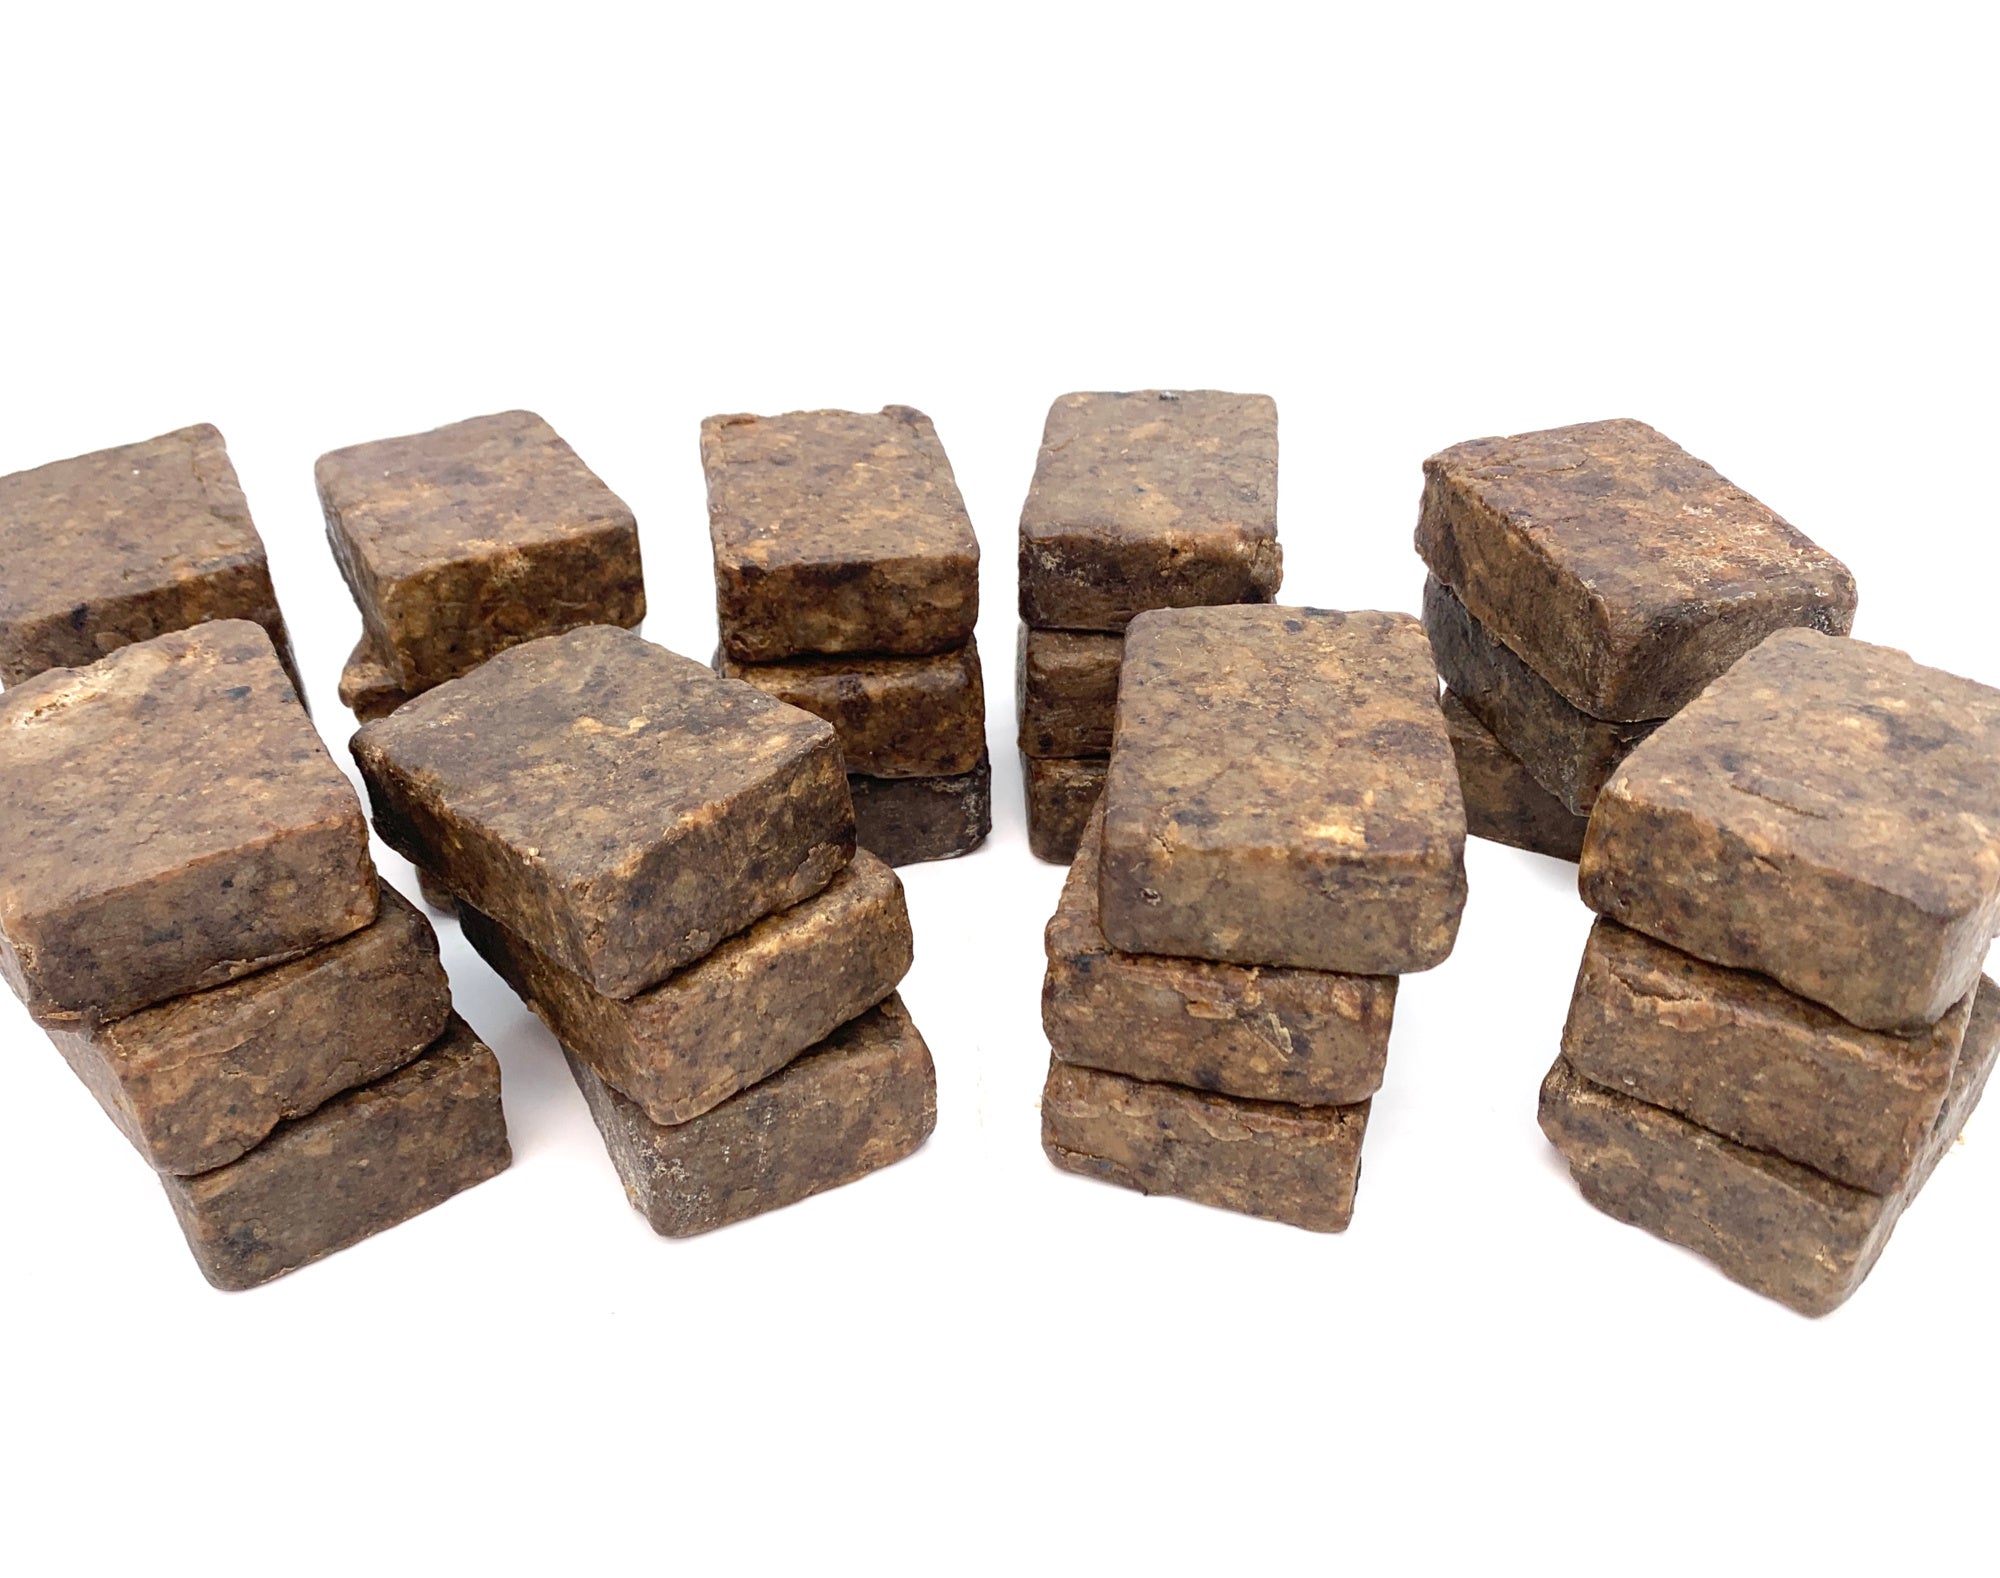 African Black Soap Bars Wholesale Box of 200